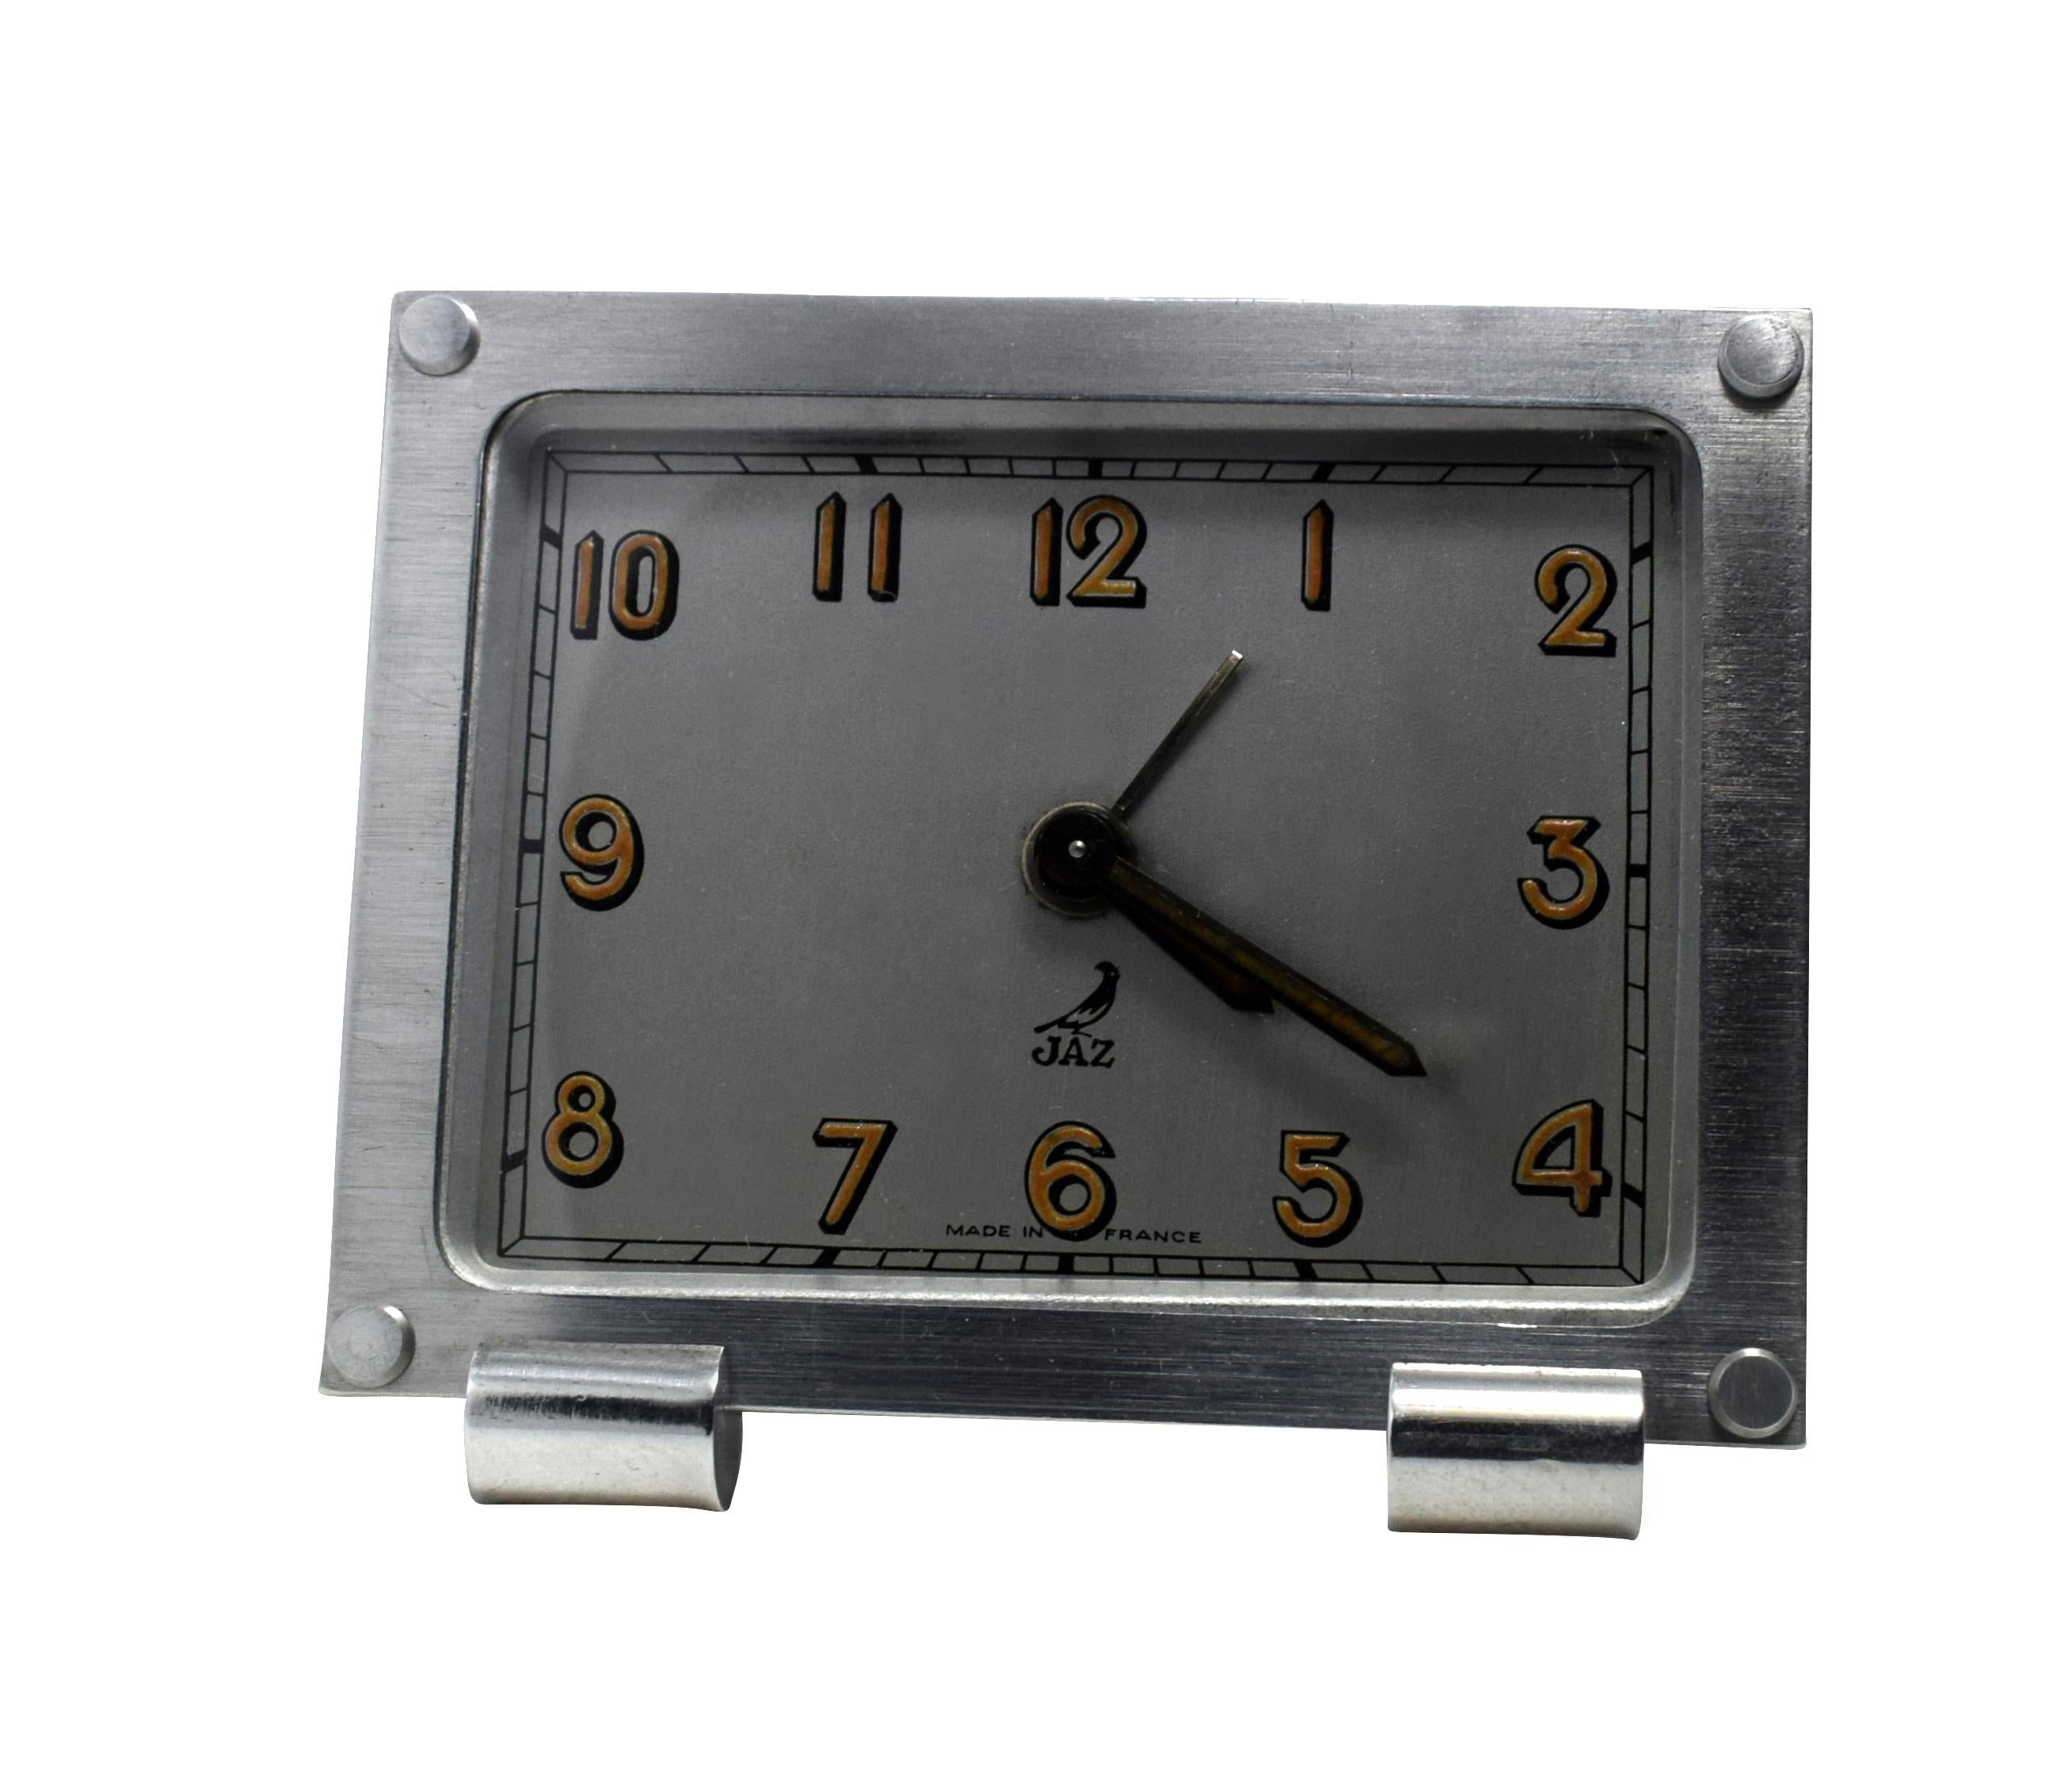 Very stylish 1930s chrome cased alarm clock by the French clock makers JAZ. This charming little clock has a silvered dial face with mustard yellow numerals making an attractive contrast and appealing look. Slender shaped and free standing with good